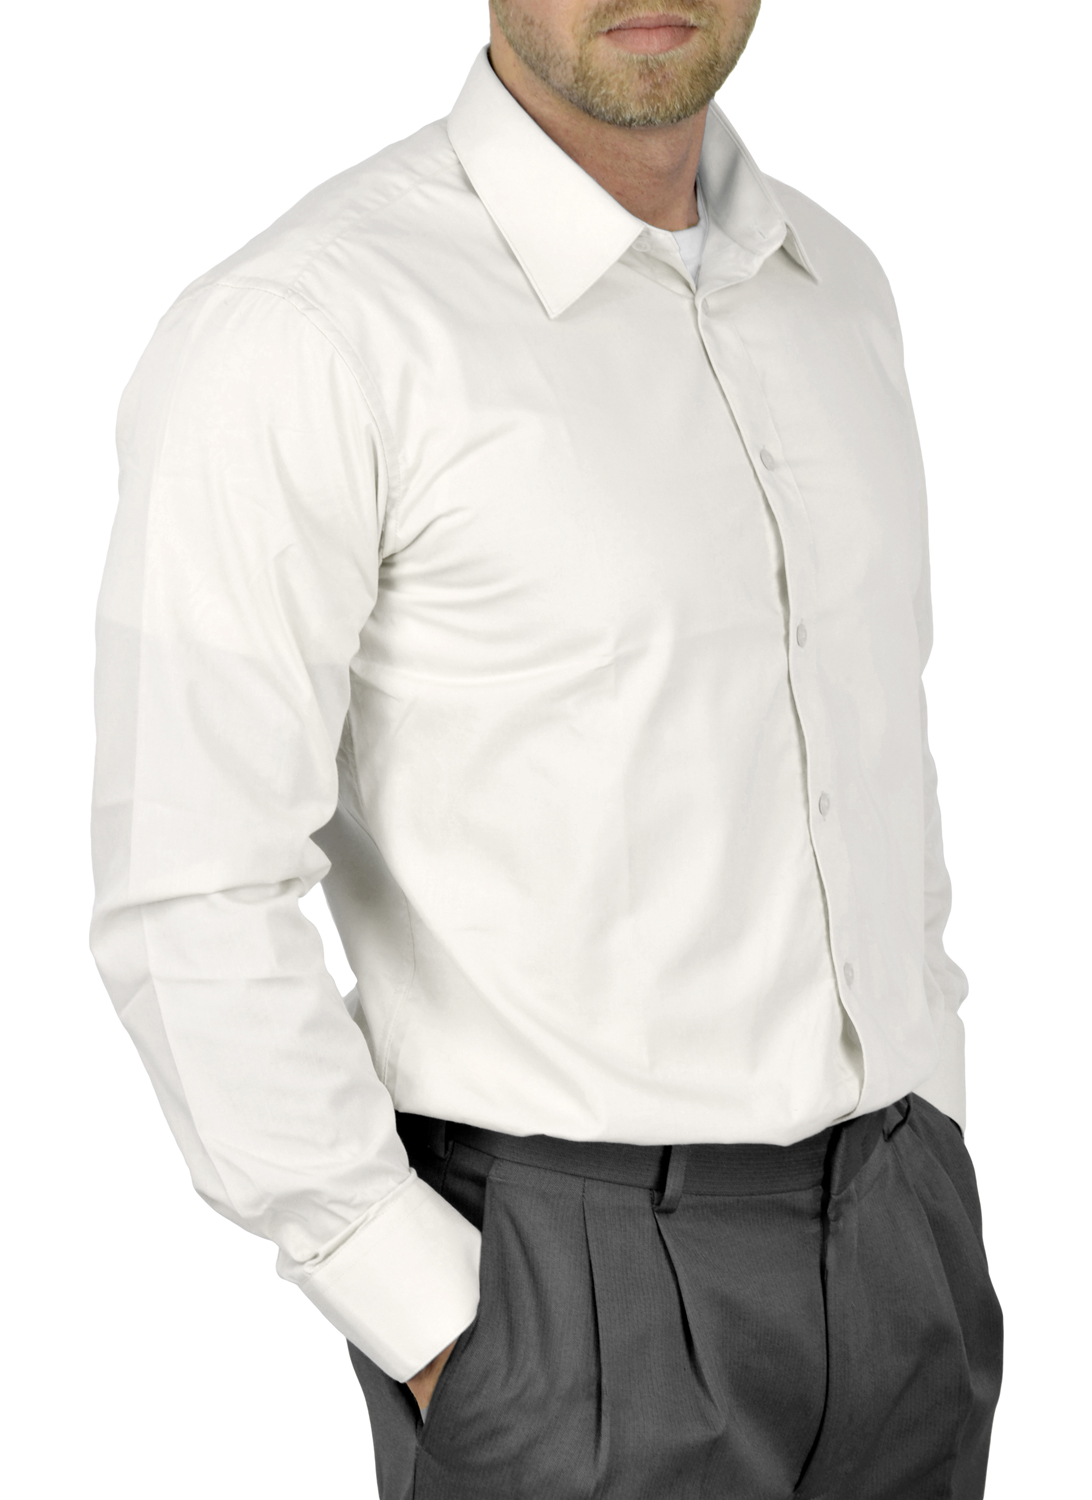 Moda Di Raza Mens Dress Shirt Slim and Regular Fit Office Casual French Cuff Off White 15.5